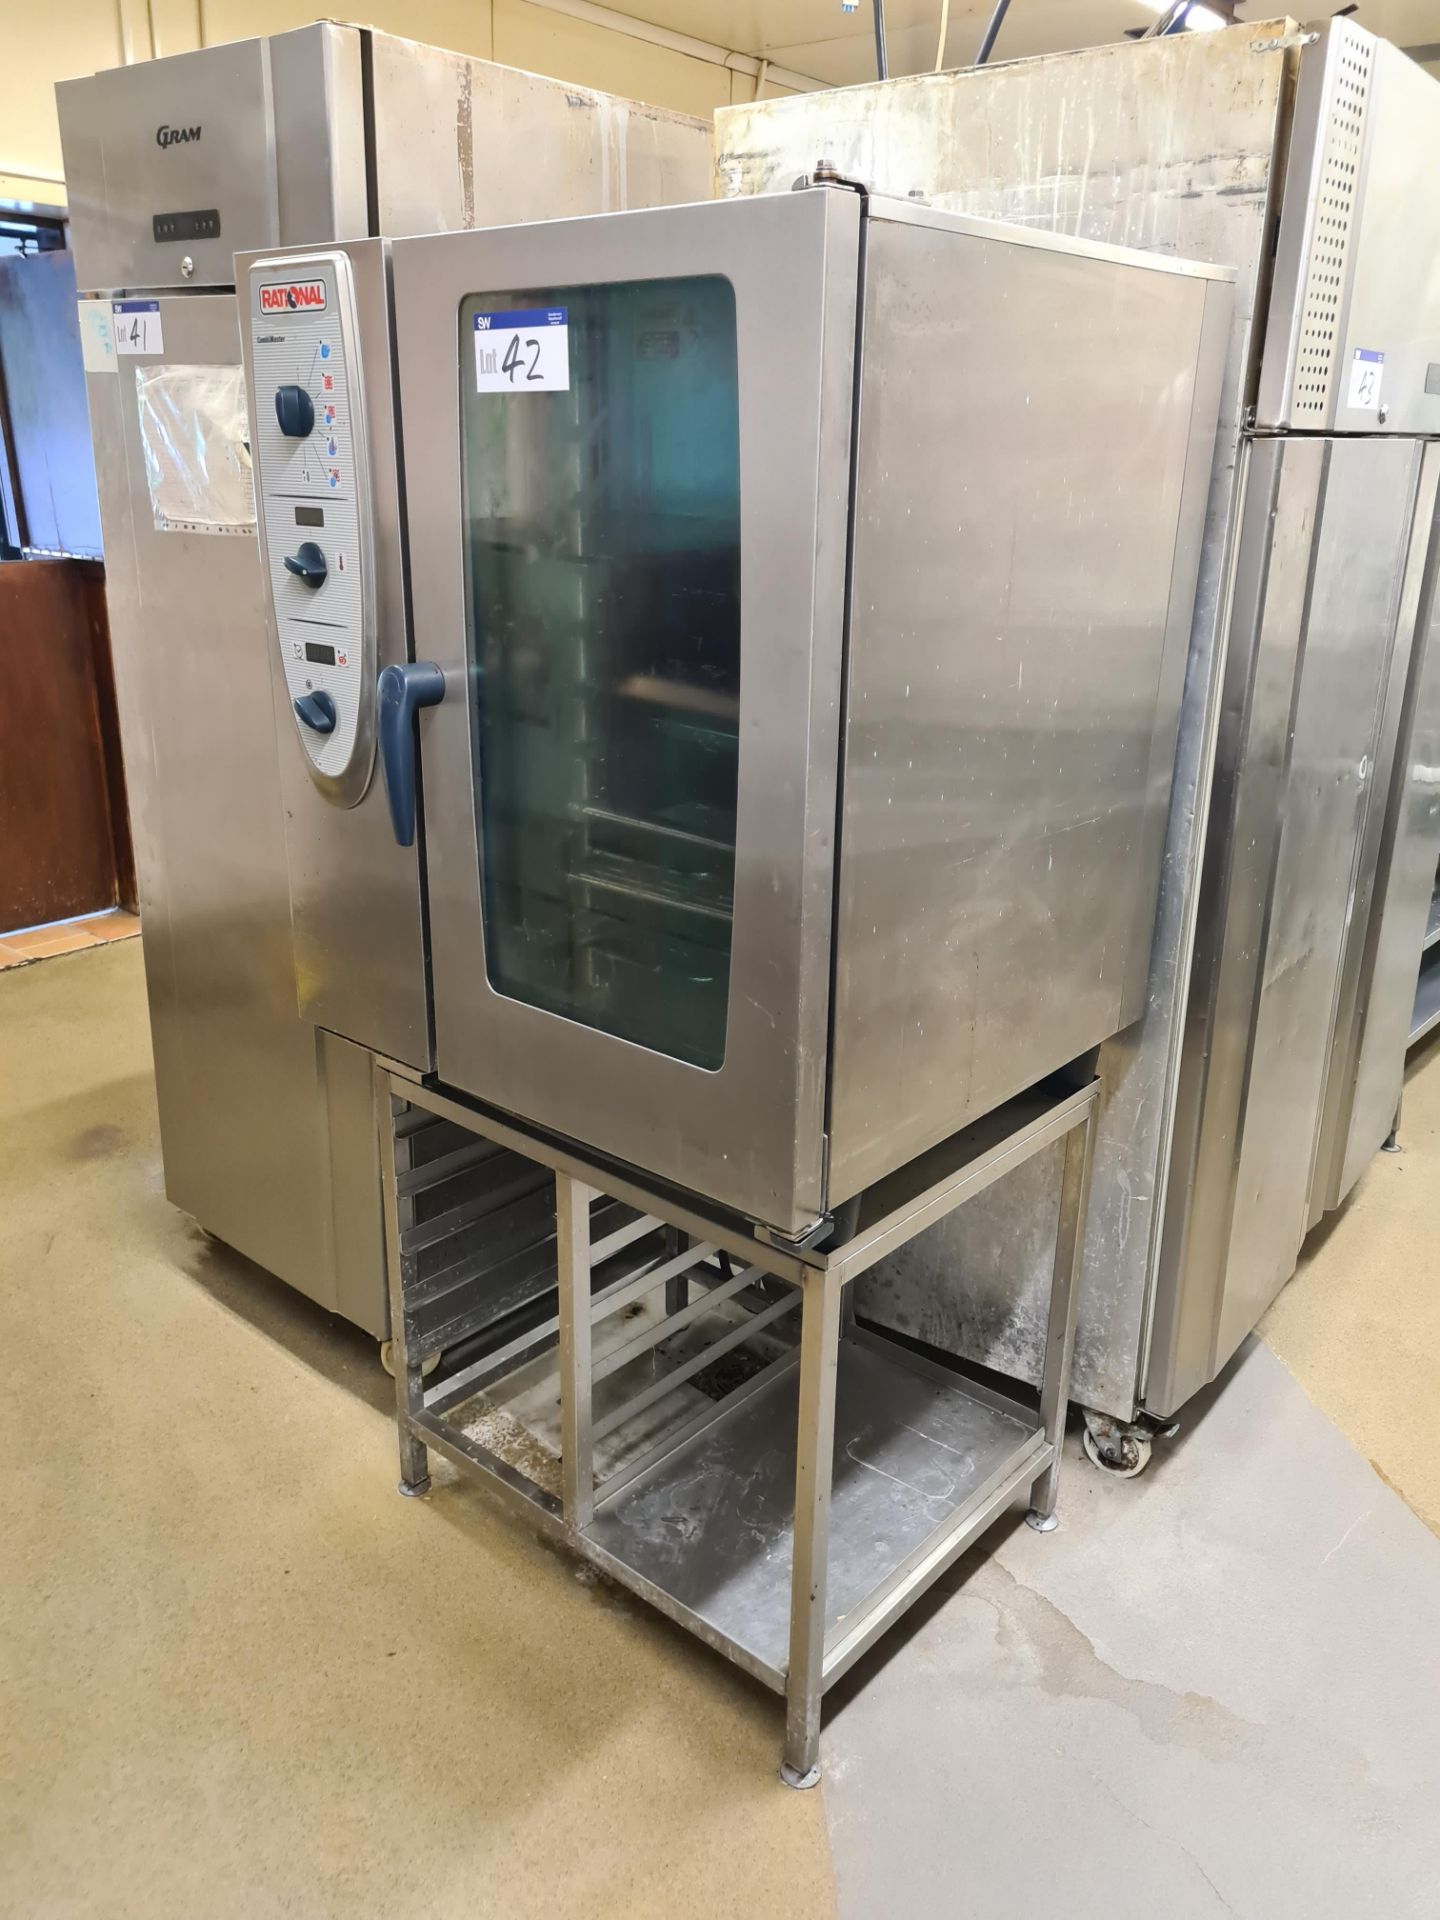 RATIONAL CombiMaster Stainless Steel Combination Oven c/w stand (415v) (Gas Needs Disconnecting